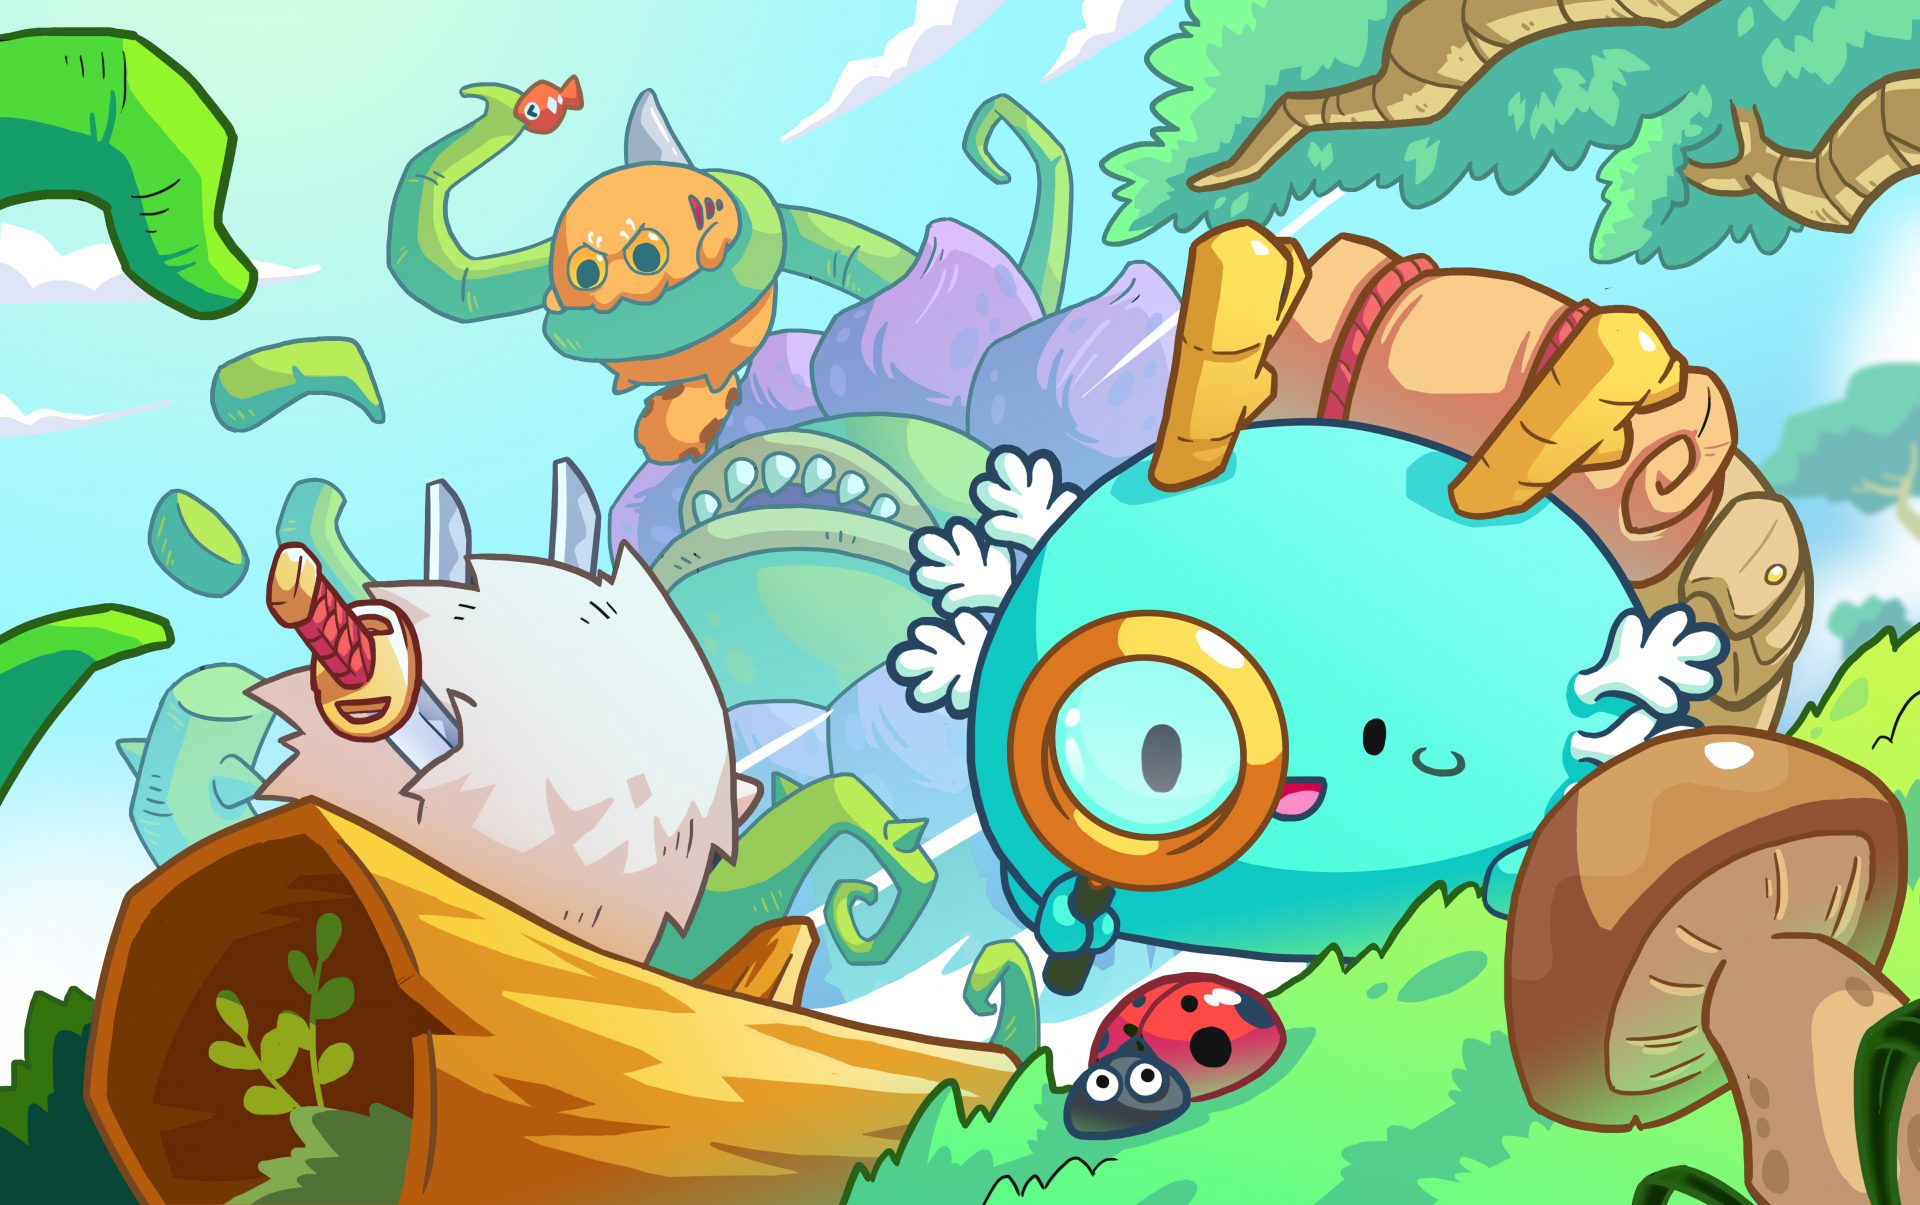 axie infinity download